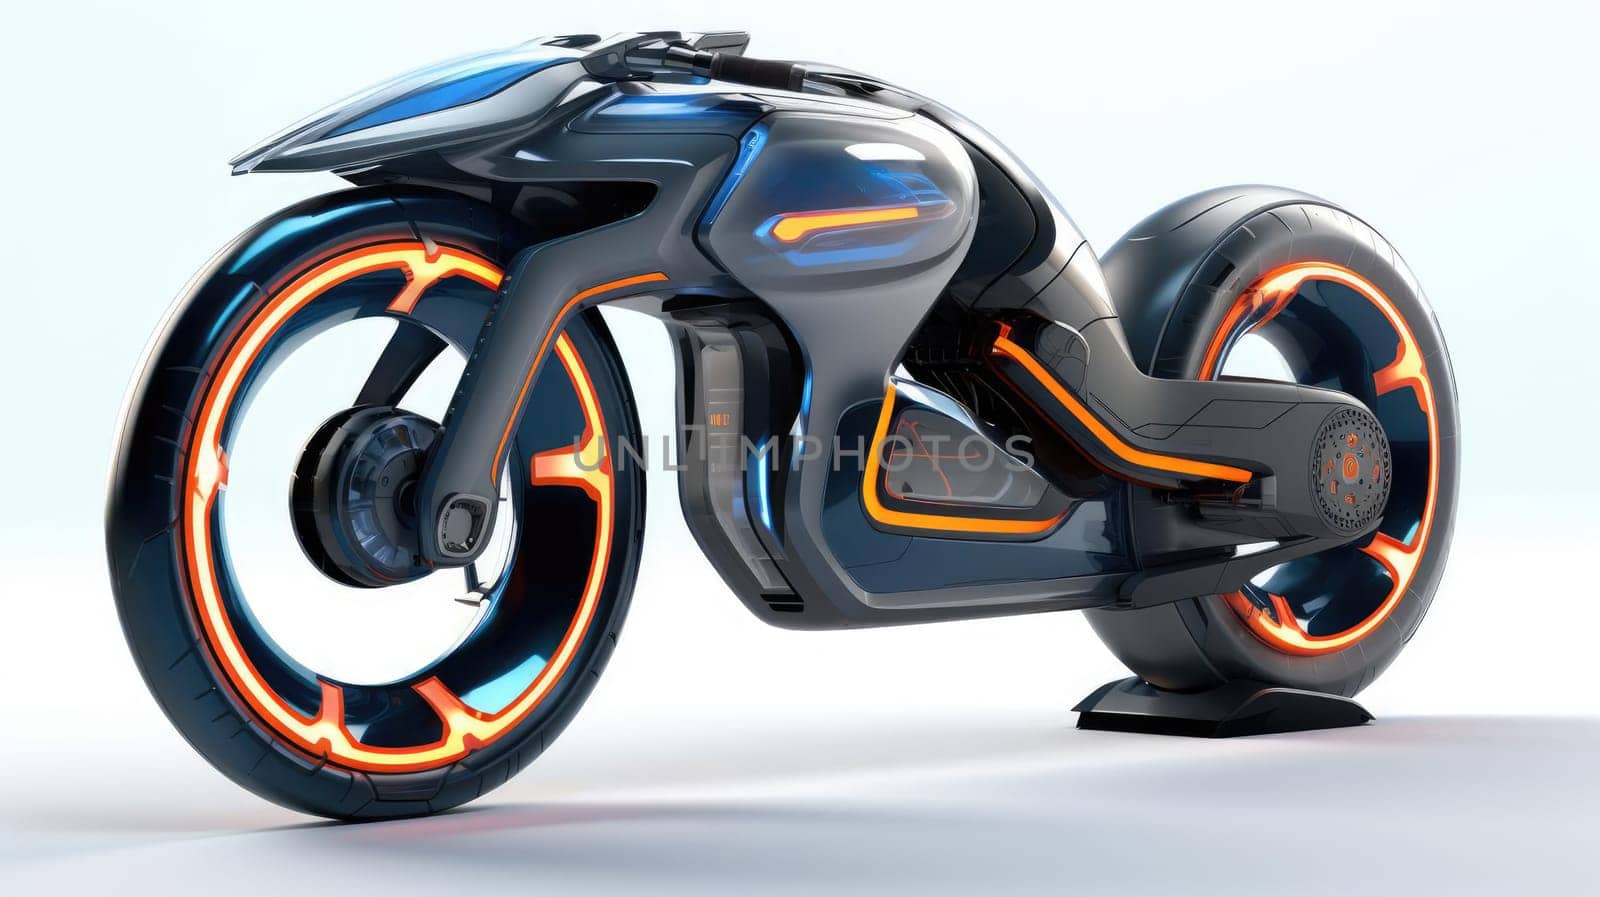 The motorcycle of the future by cherezoff